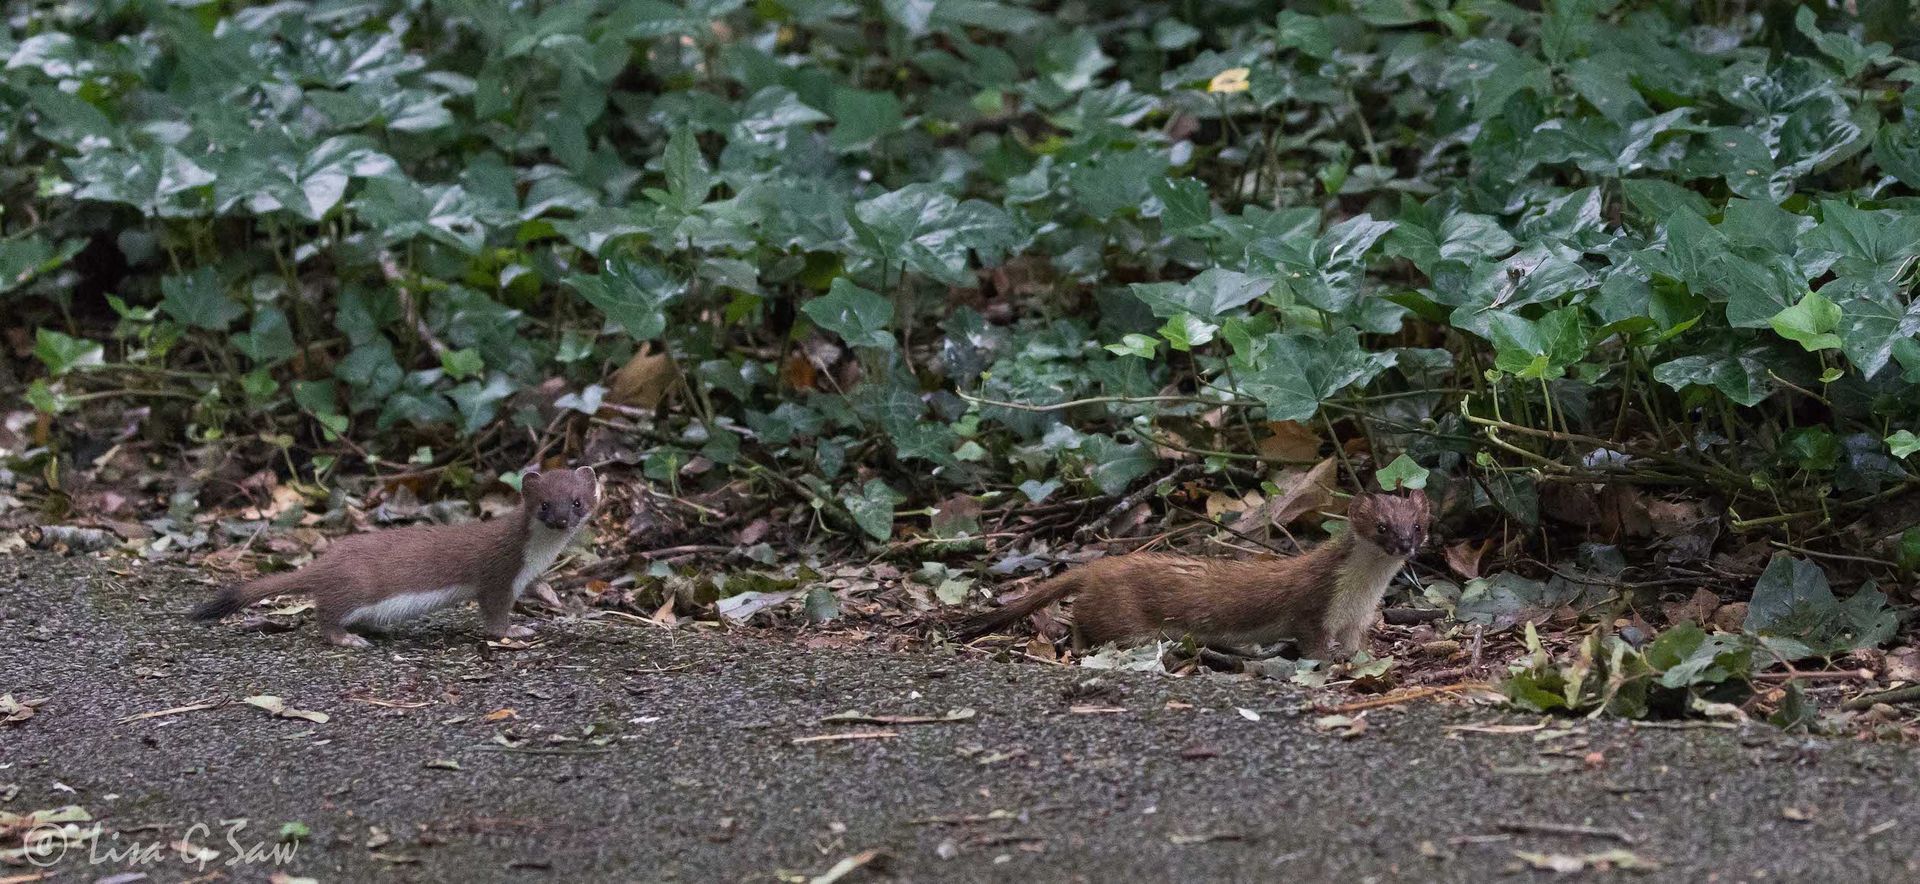 Two Stoats, adult and kit, on path